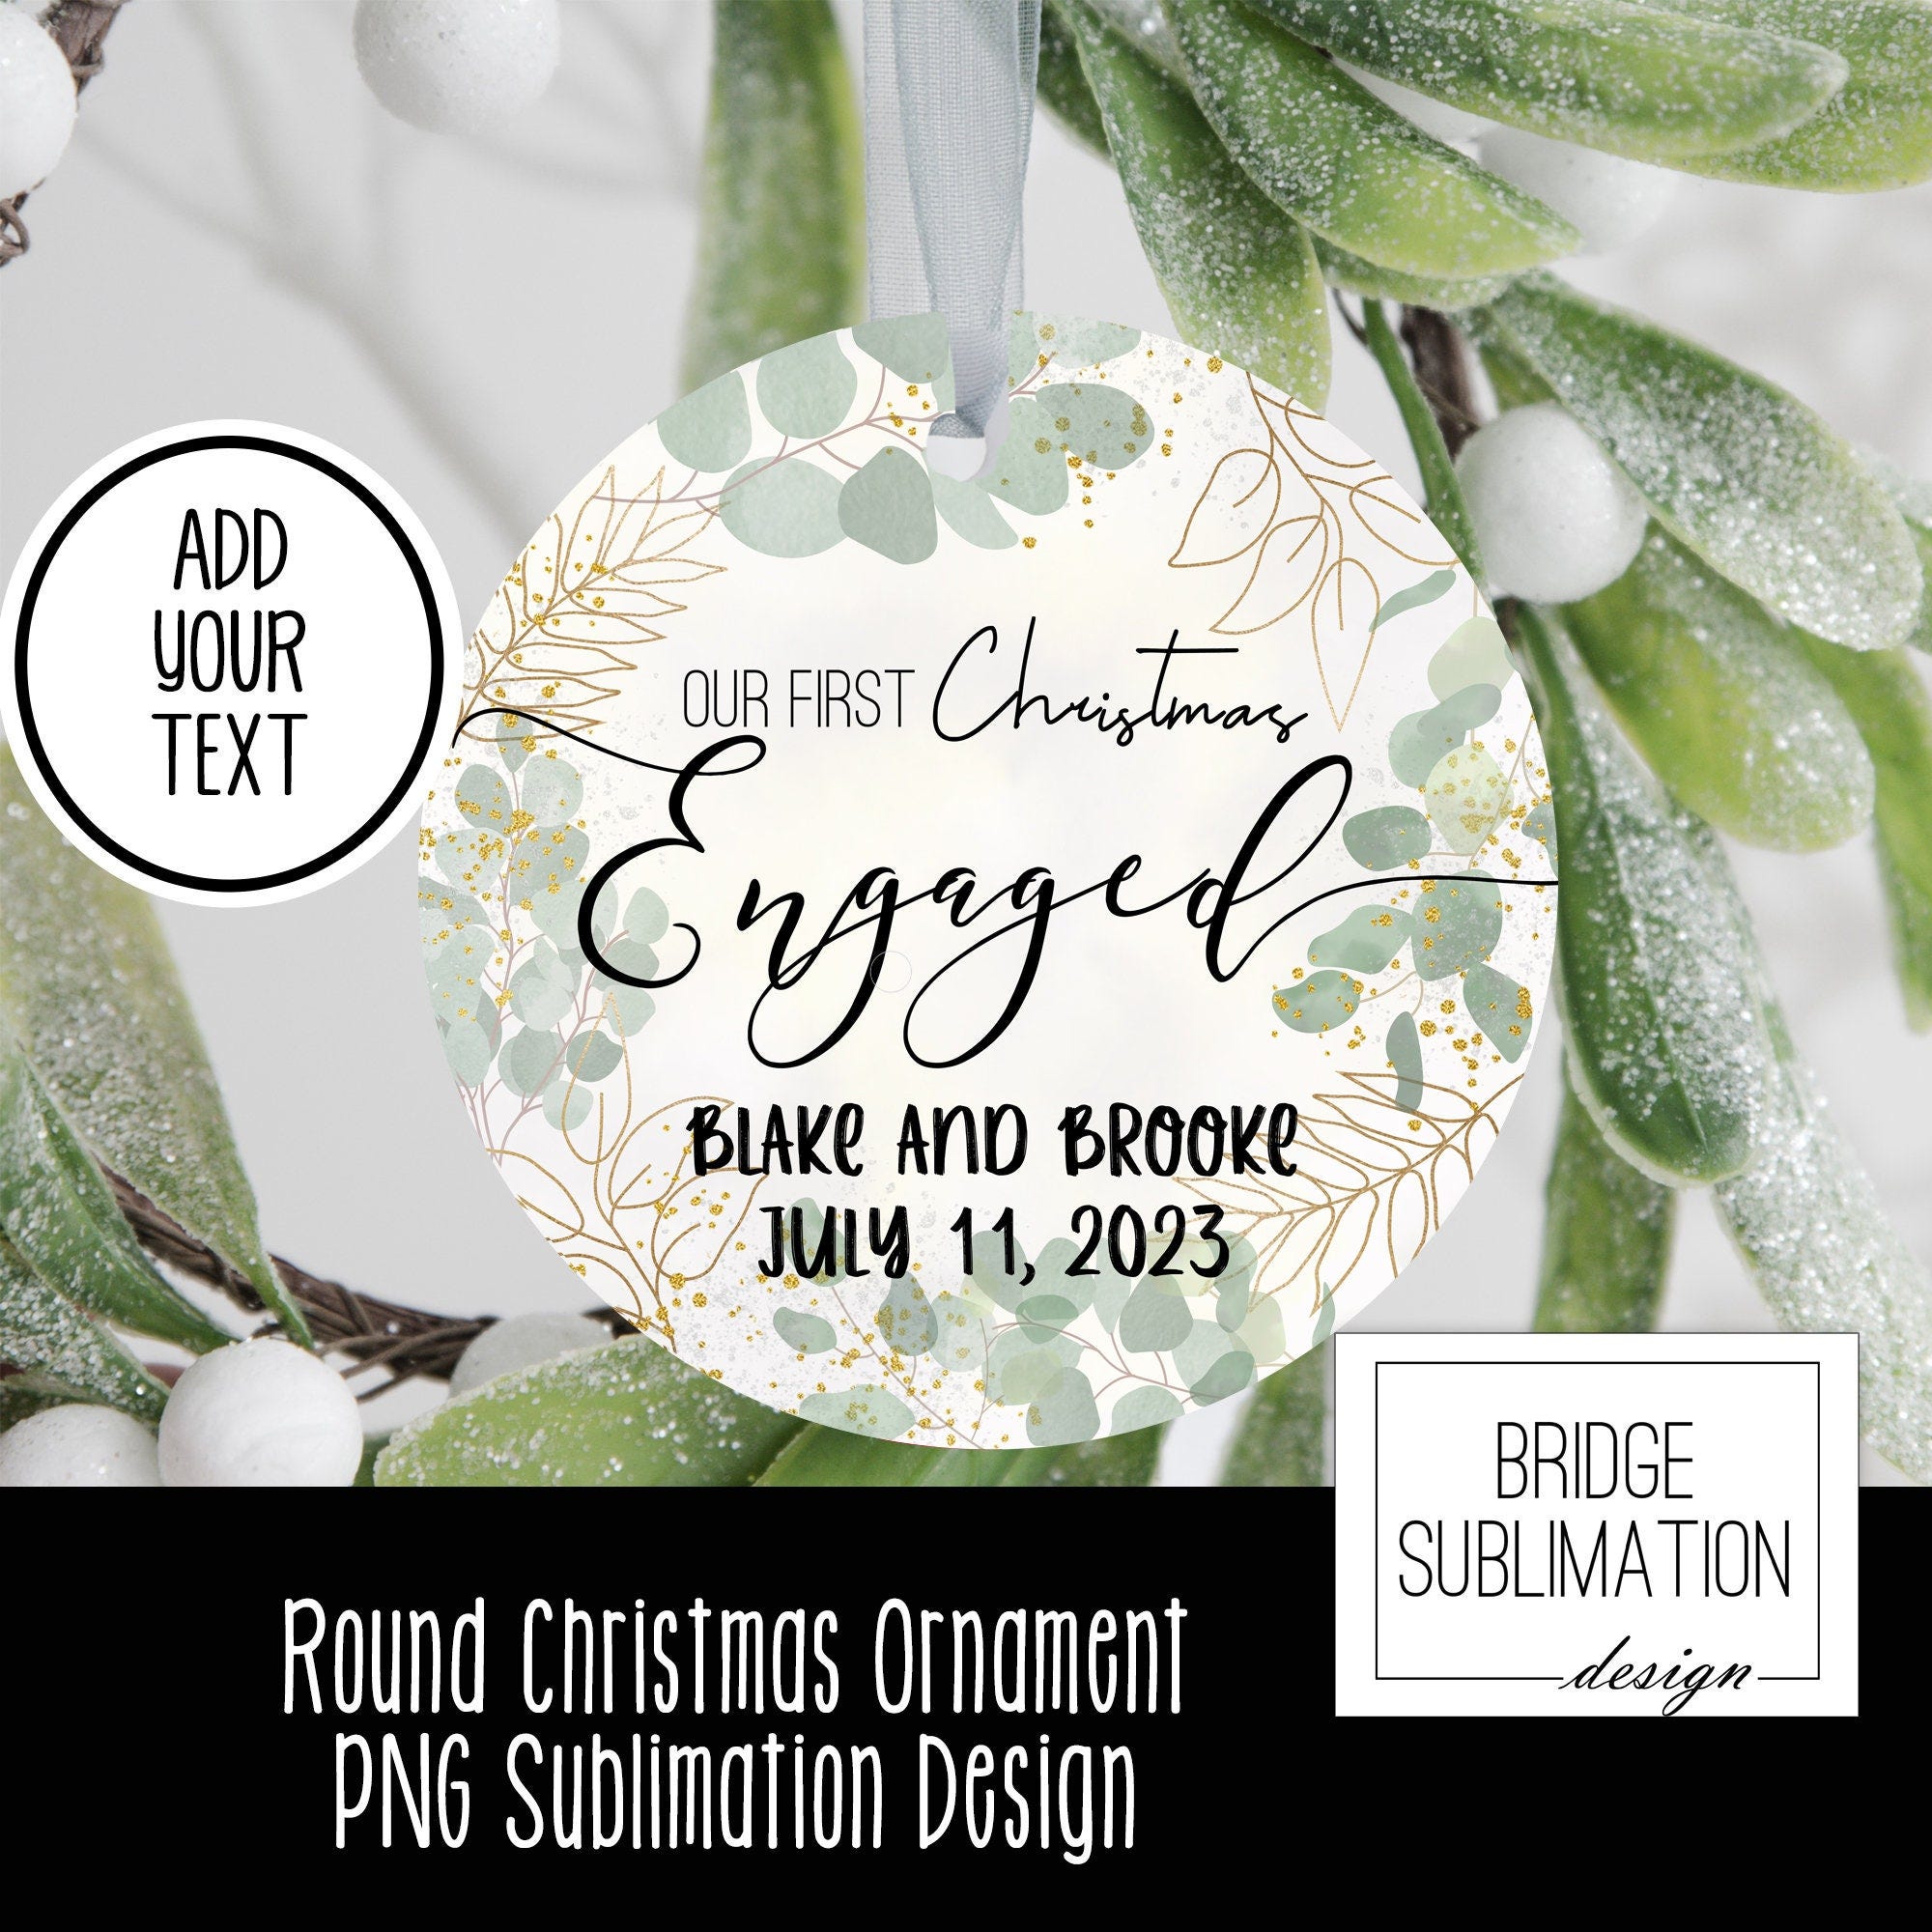 First Christmas Engaged Round Ornament PNG Sublimation Template, Engaged Christmas Ornament Sublimation Designs PNG Download, Commercial Use